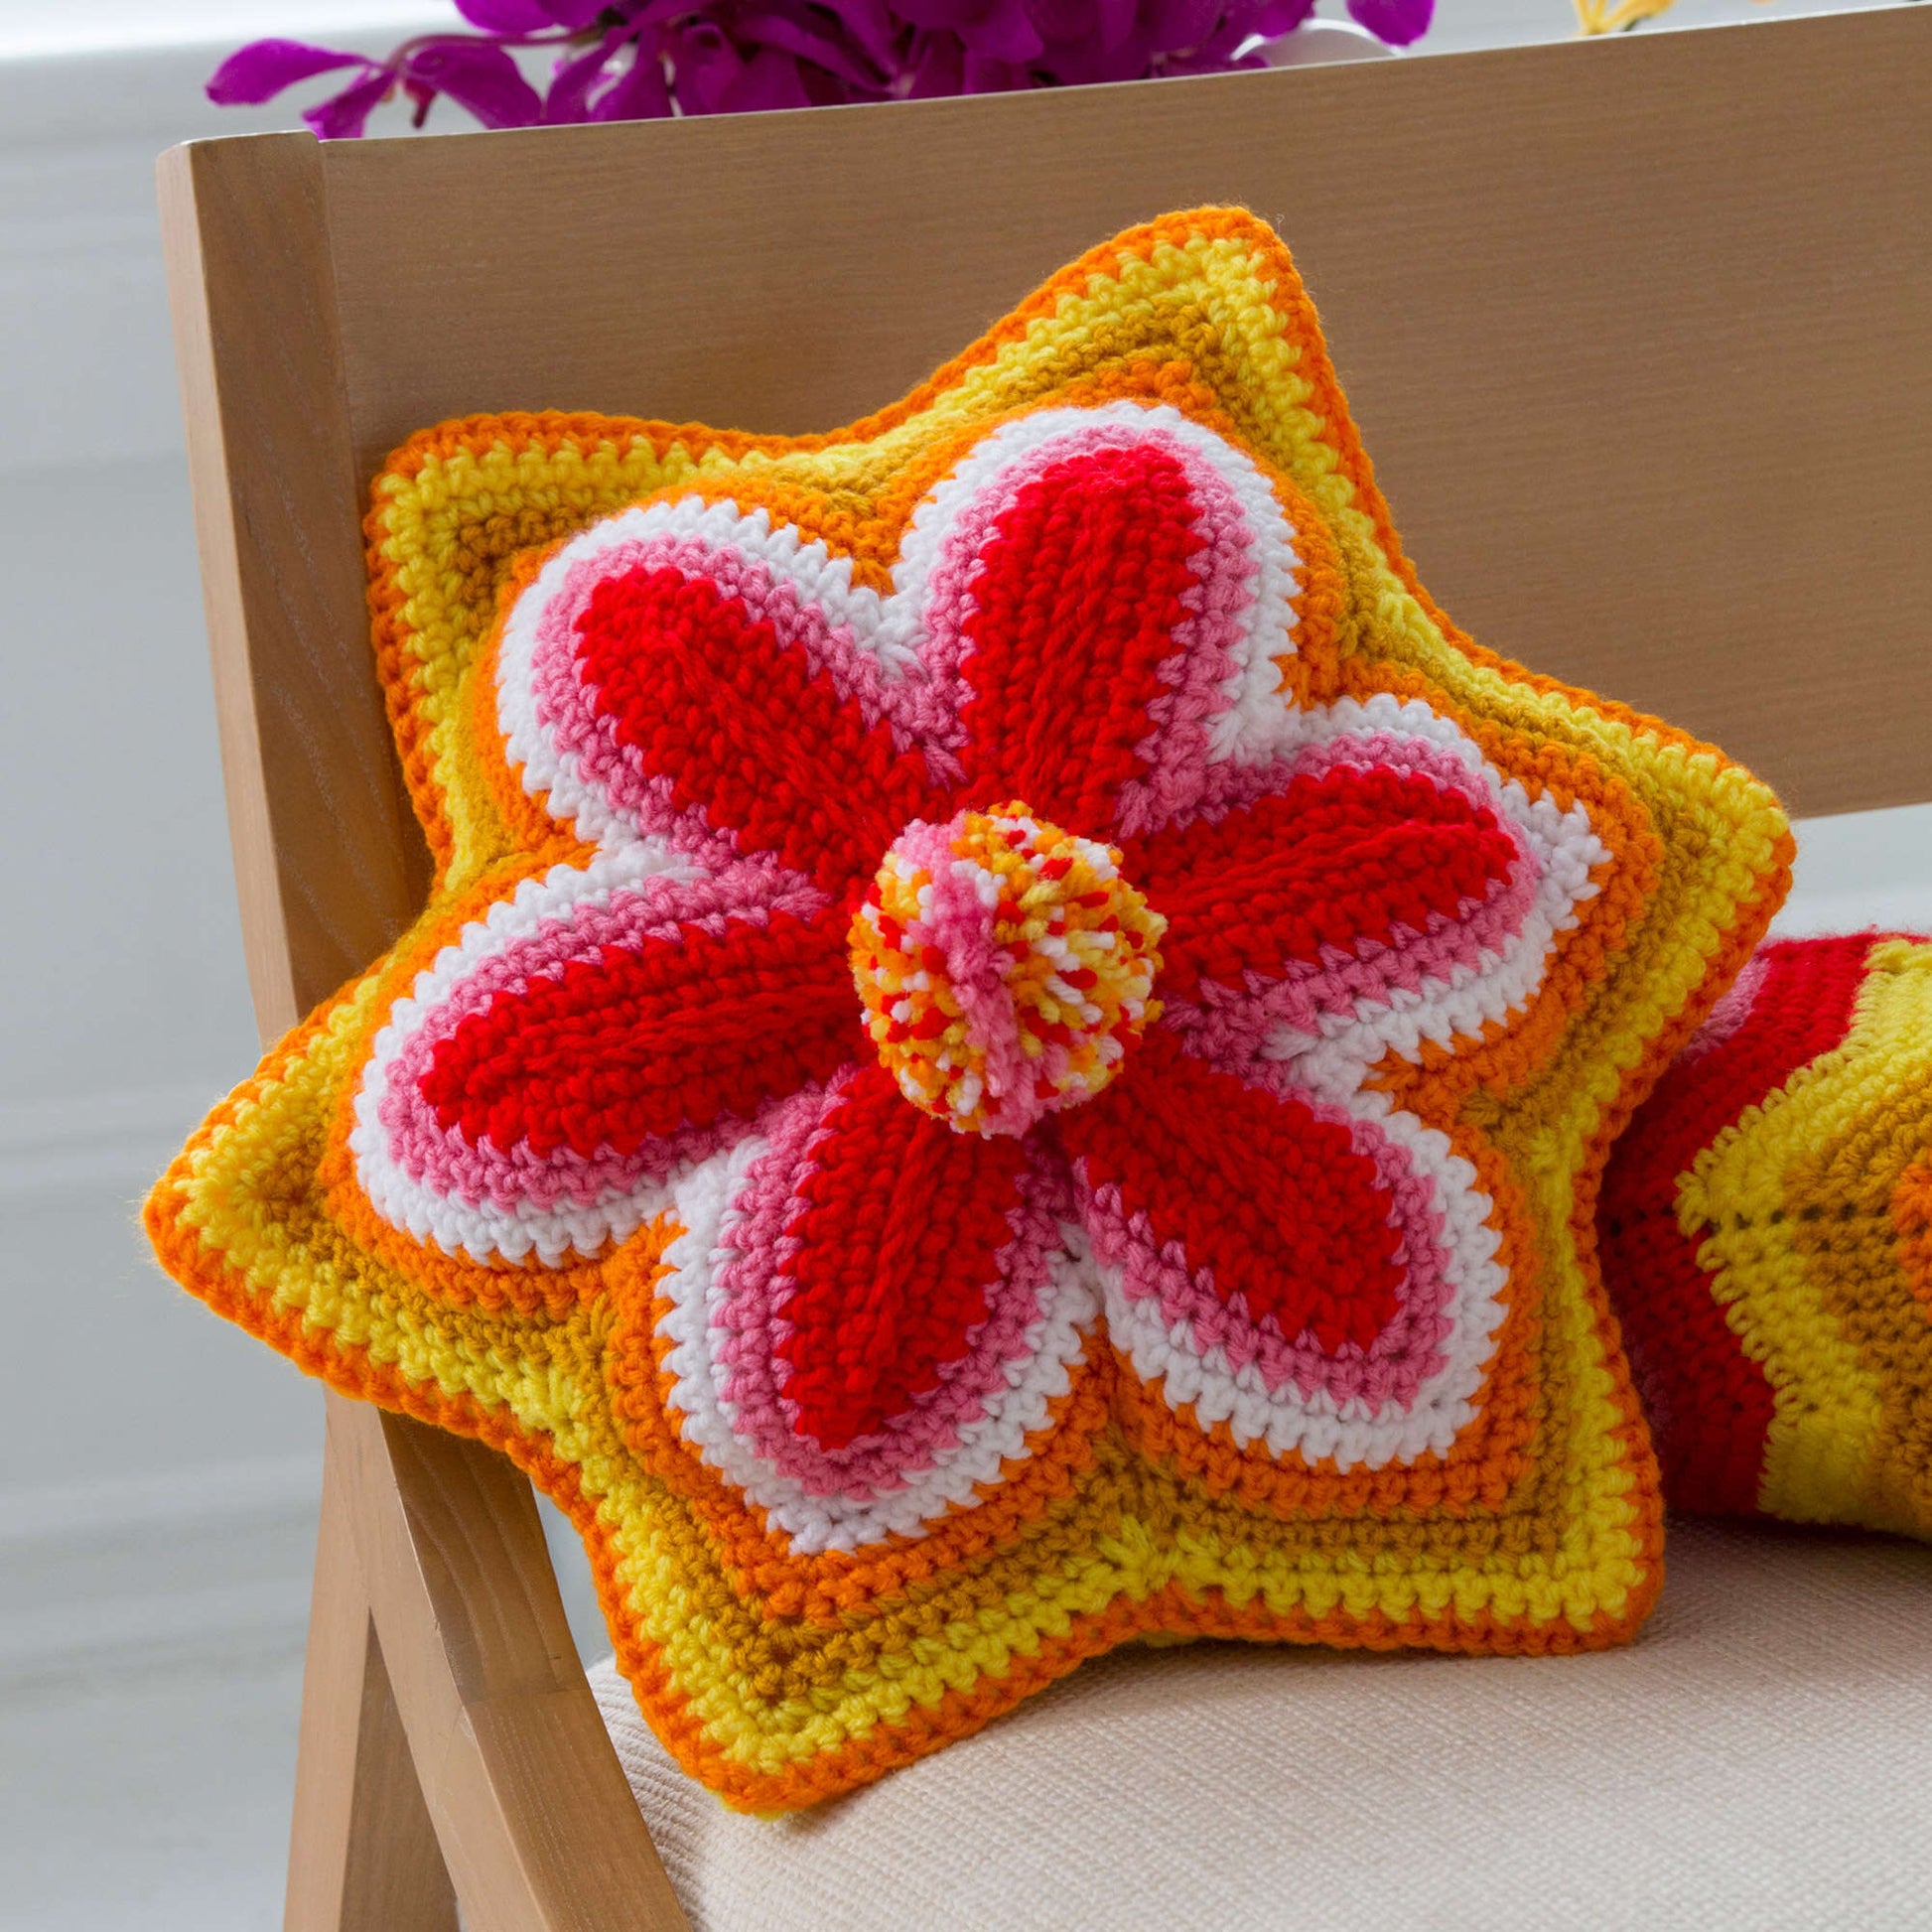 Free Red Heart Crochet Brighter Days Pillows Pattern